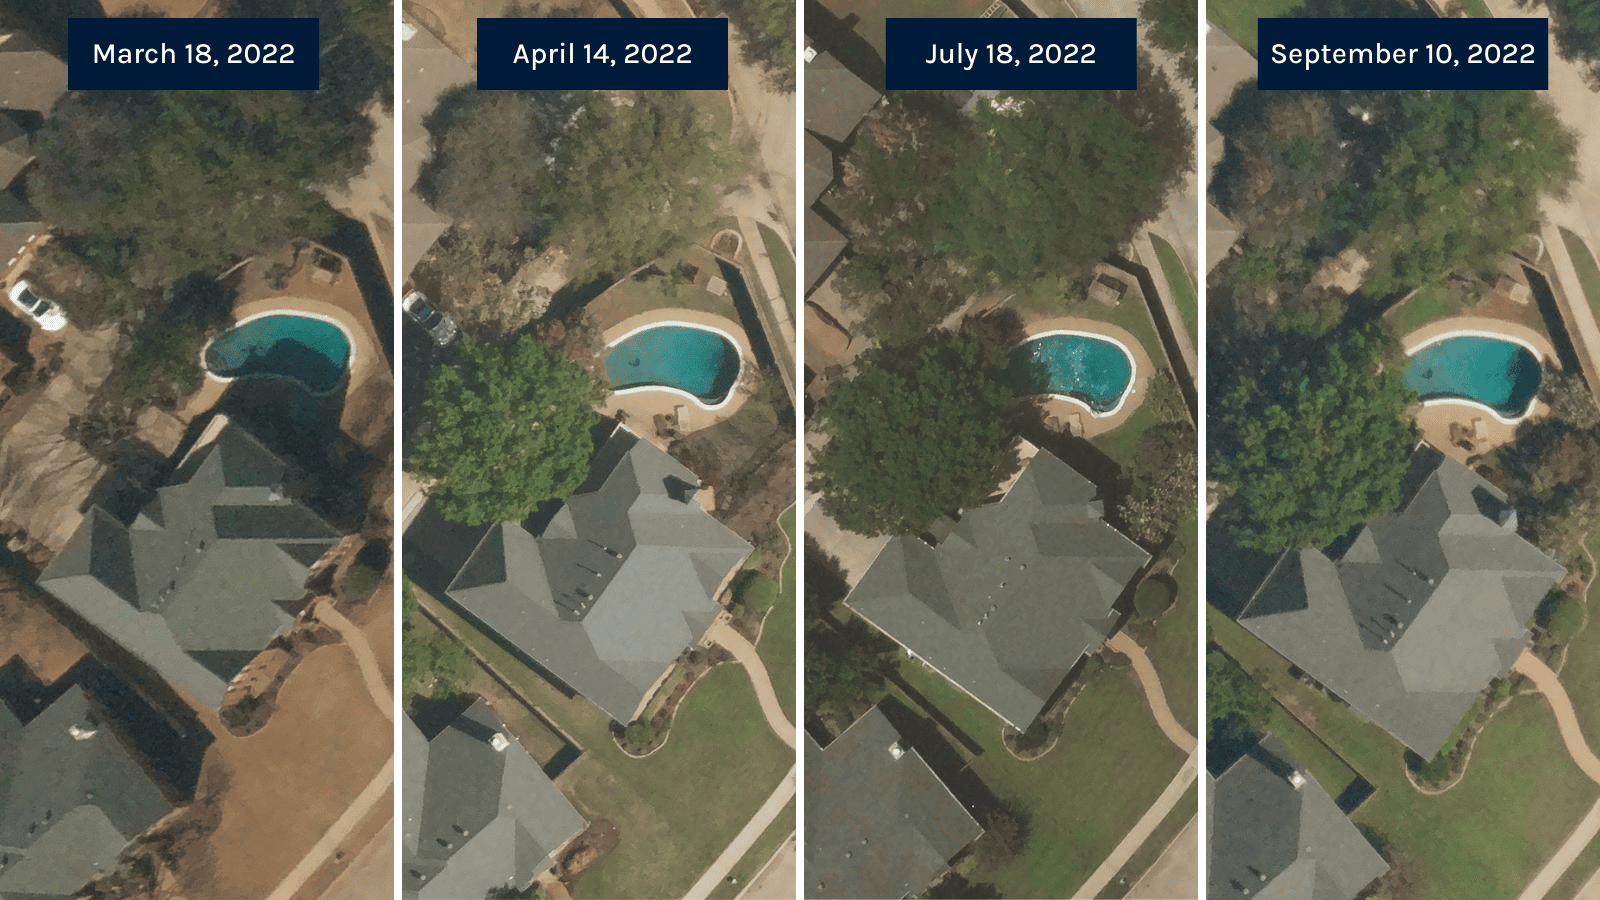 Near Space Labs' high-frequency captures of a residential property over four time periods within a year. Noticeable changes are vegetation growth around the property.